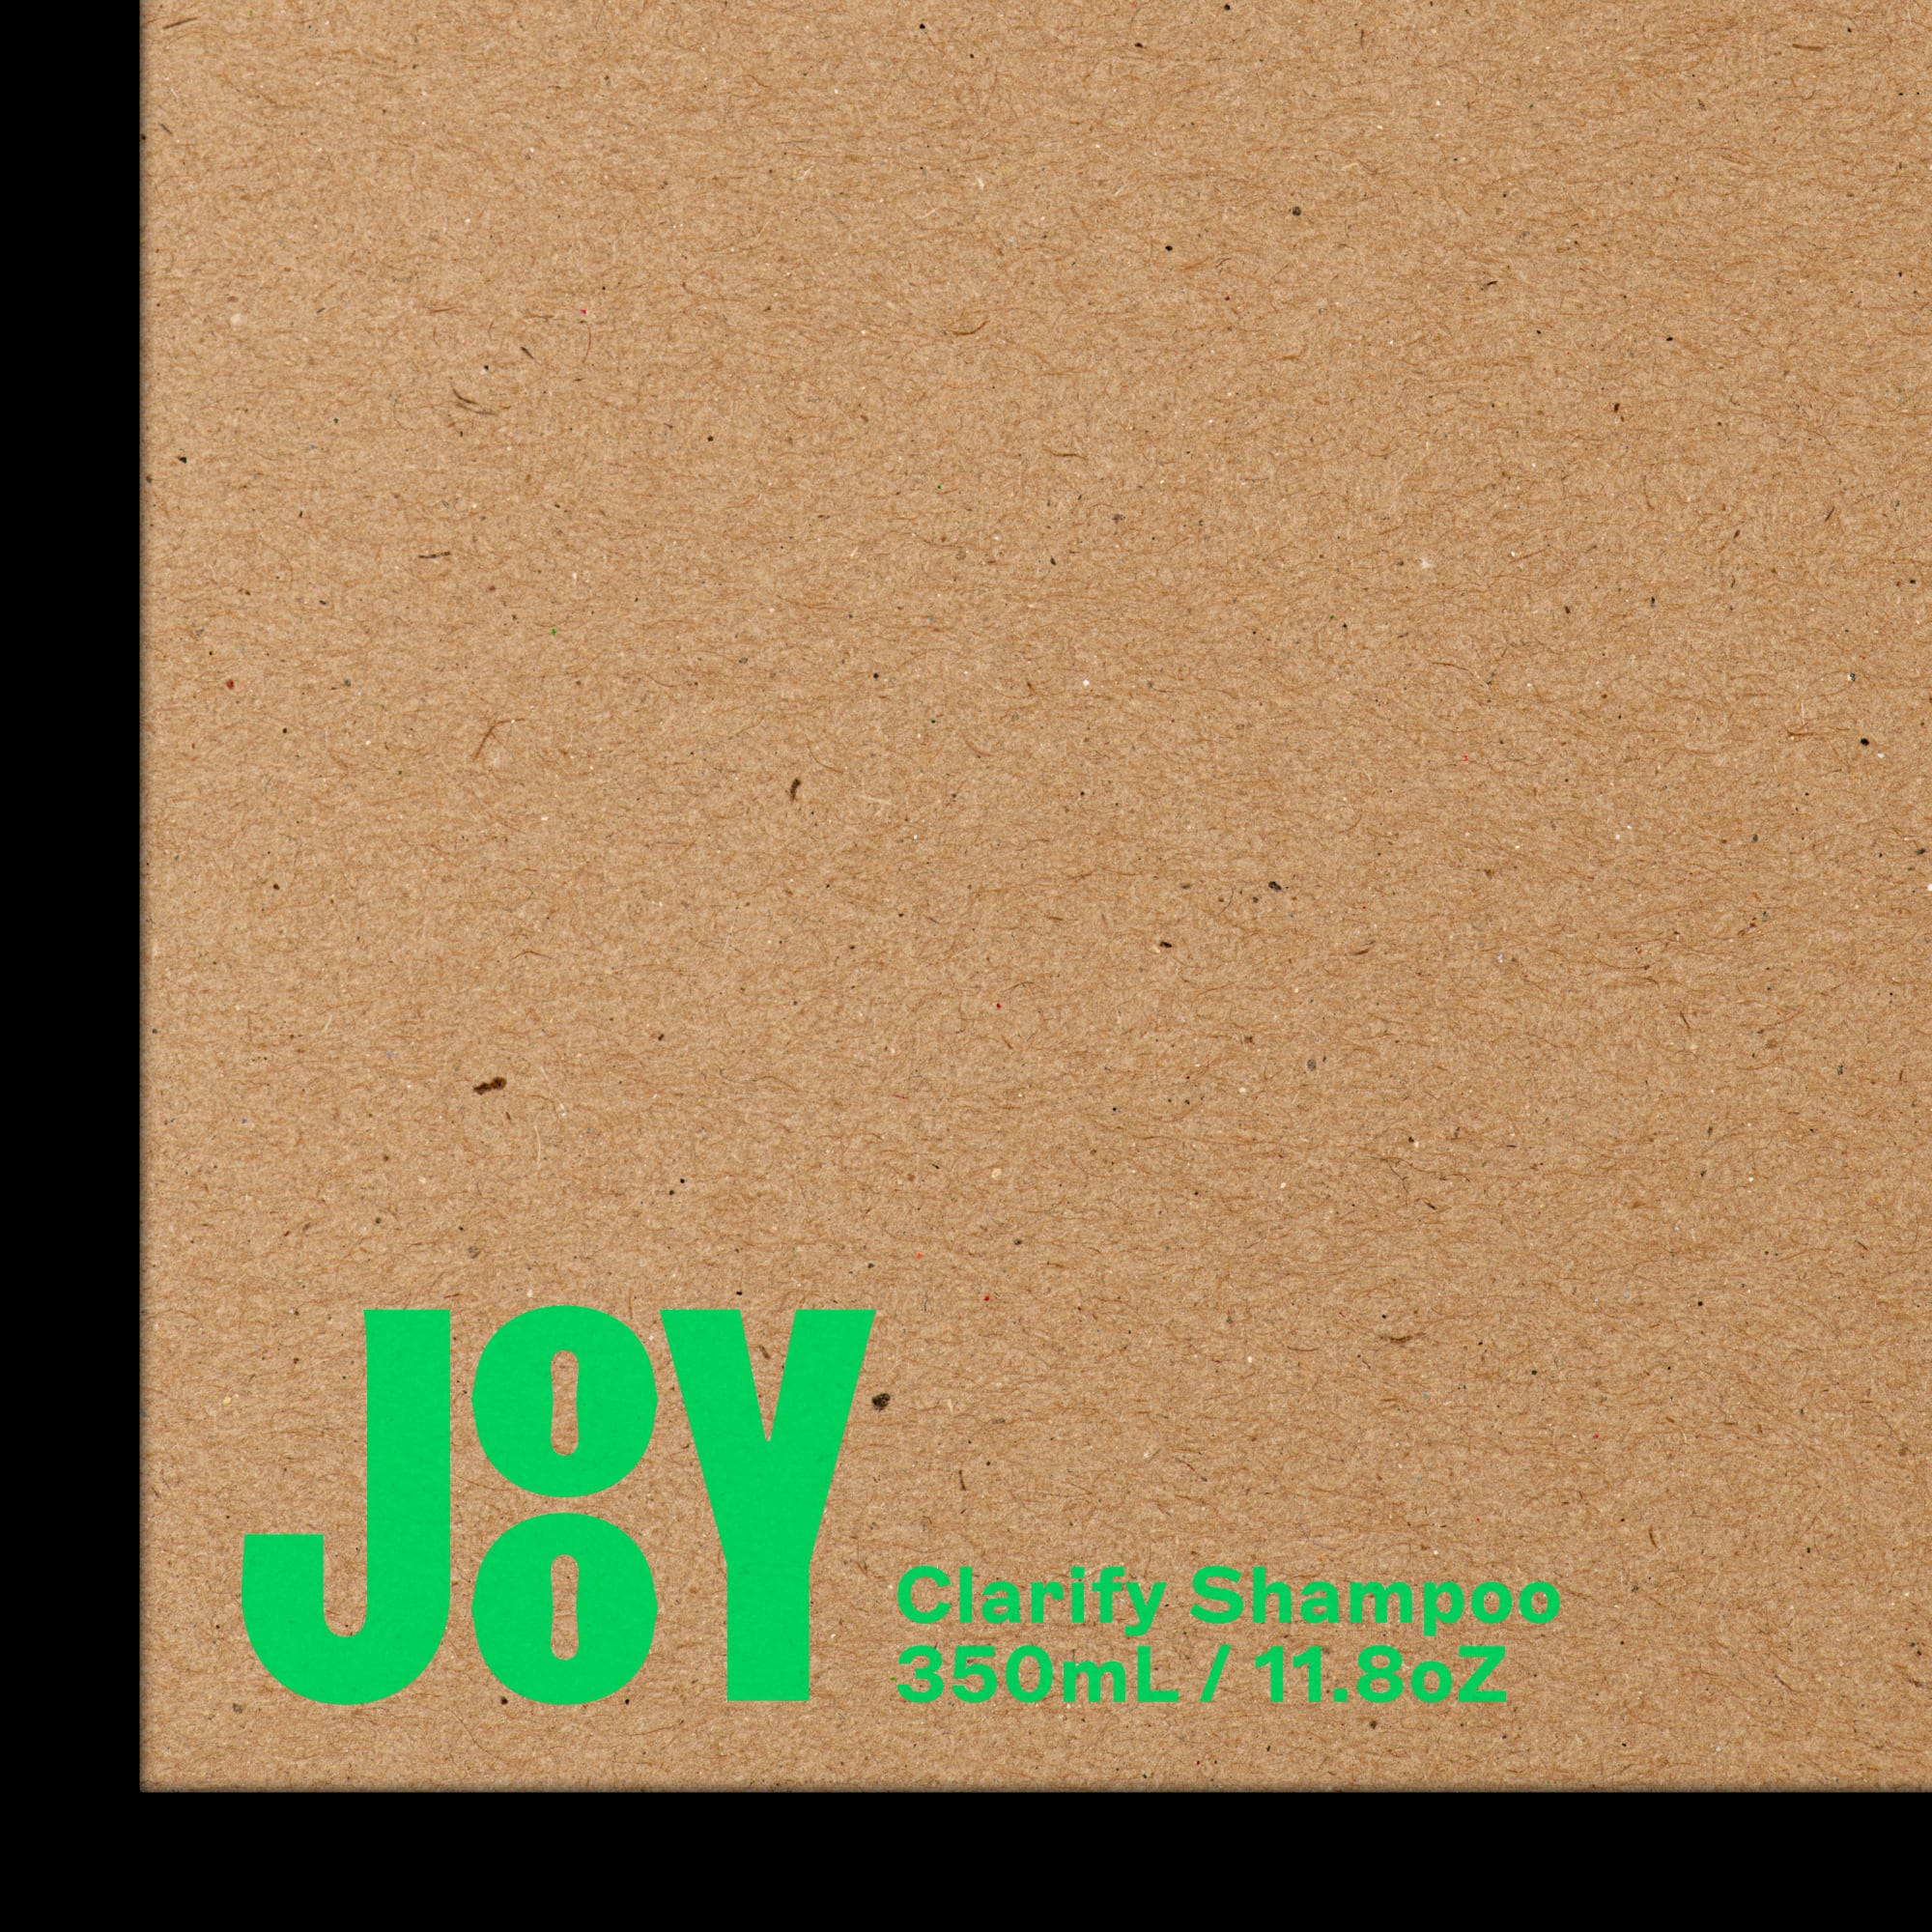 jooy identity wormark close crop into packaging